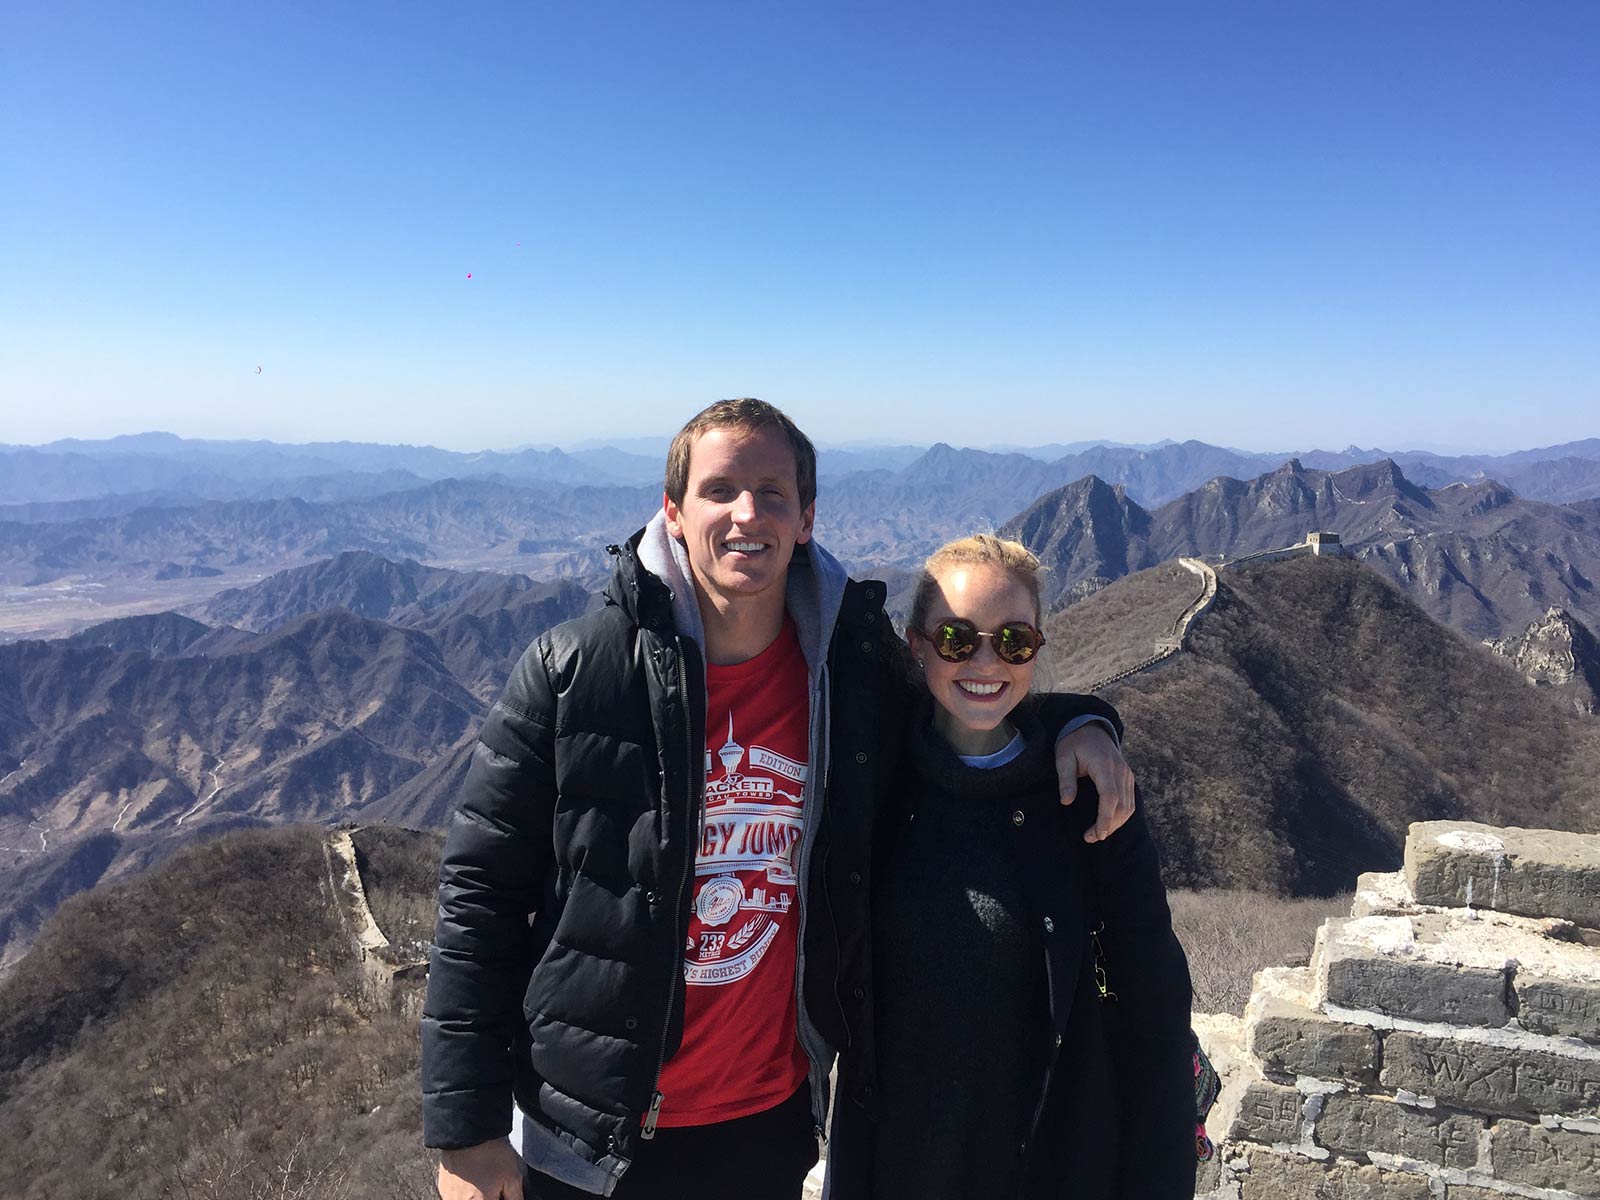 David Simpson and friend girl at the Great Wall of China in Beijing, China. The Great Wall of China